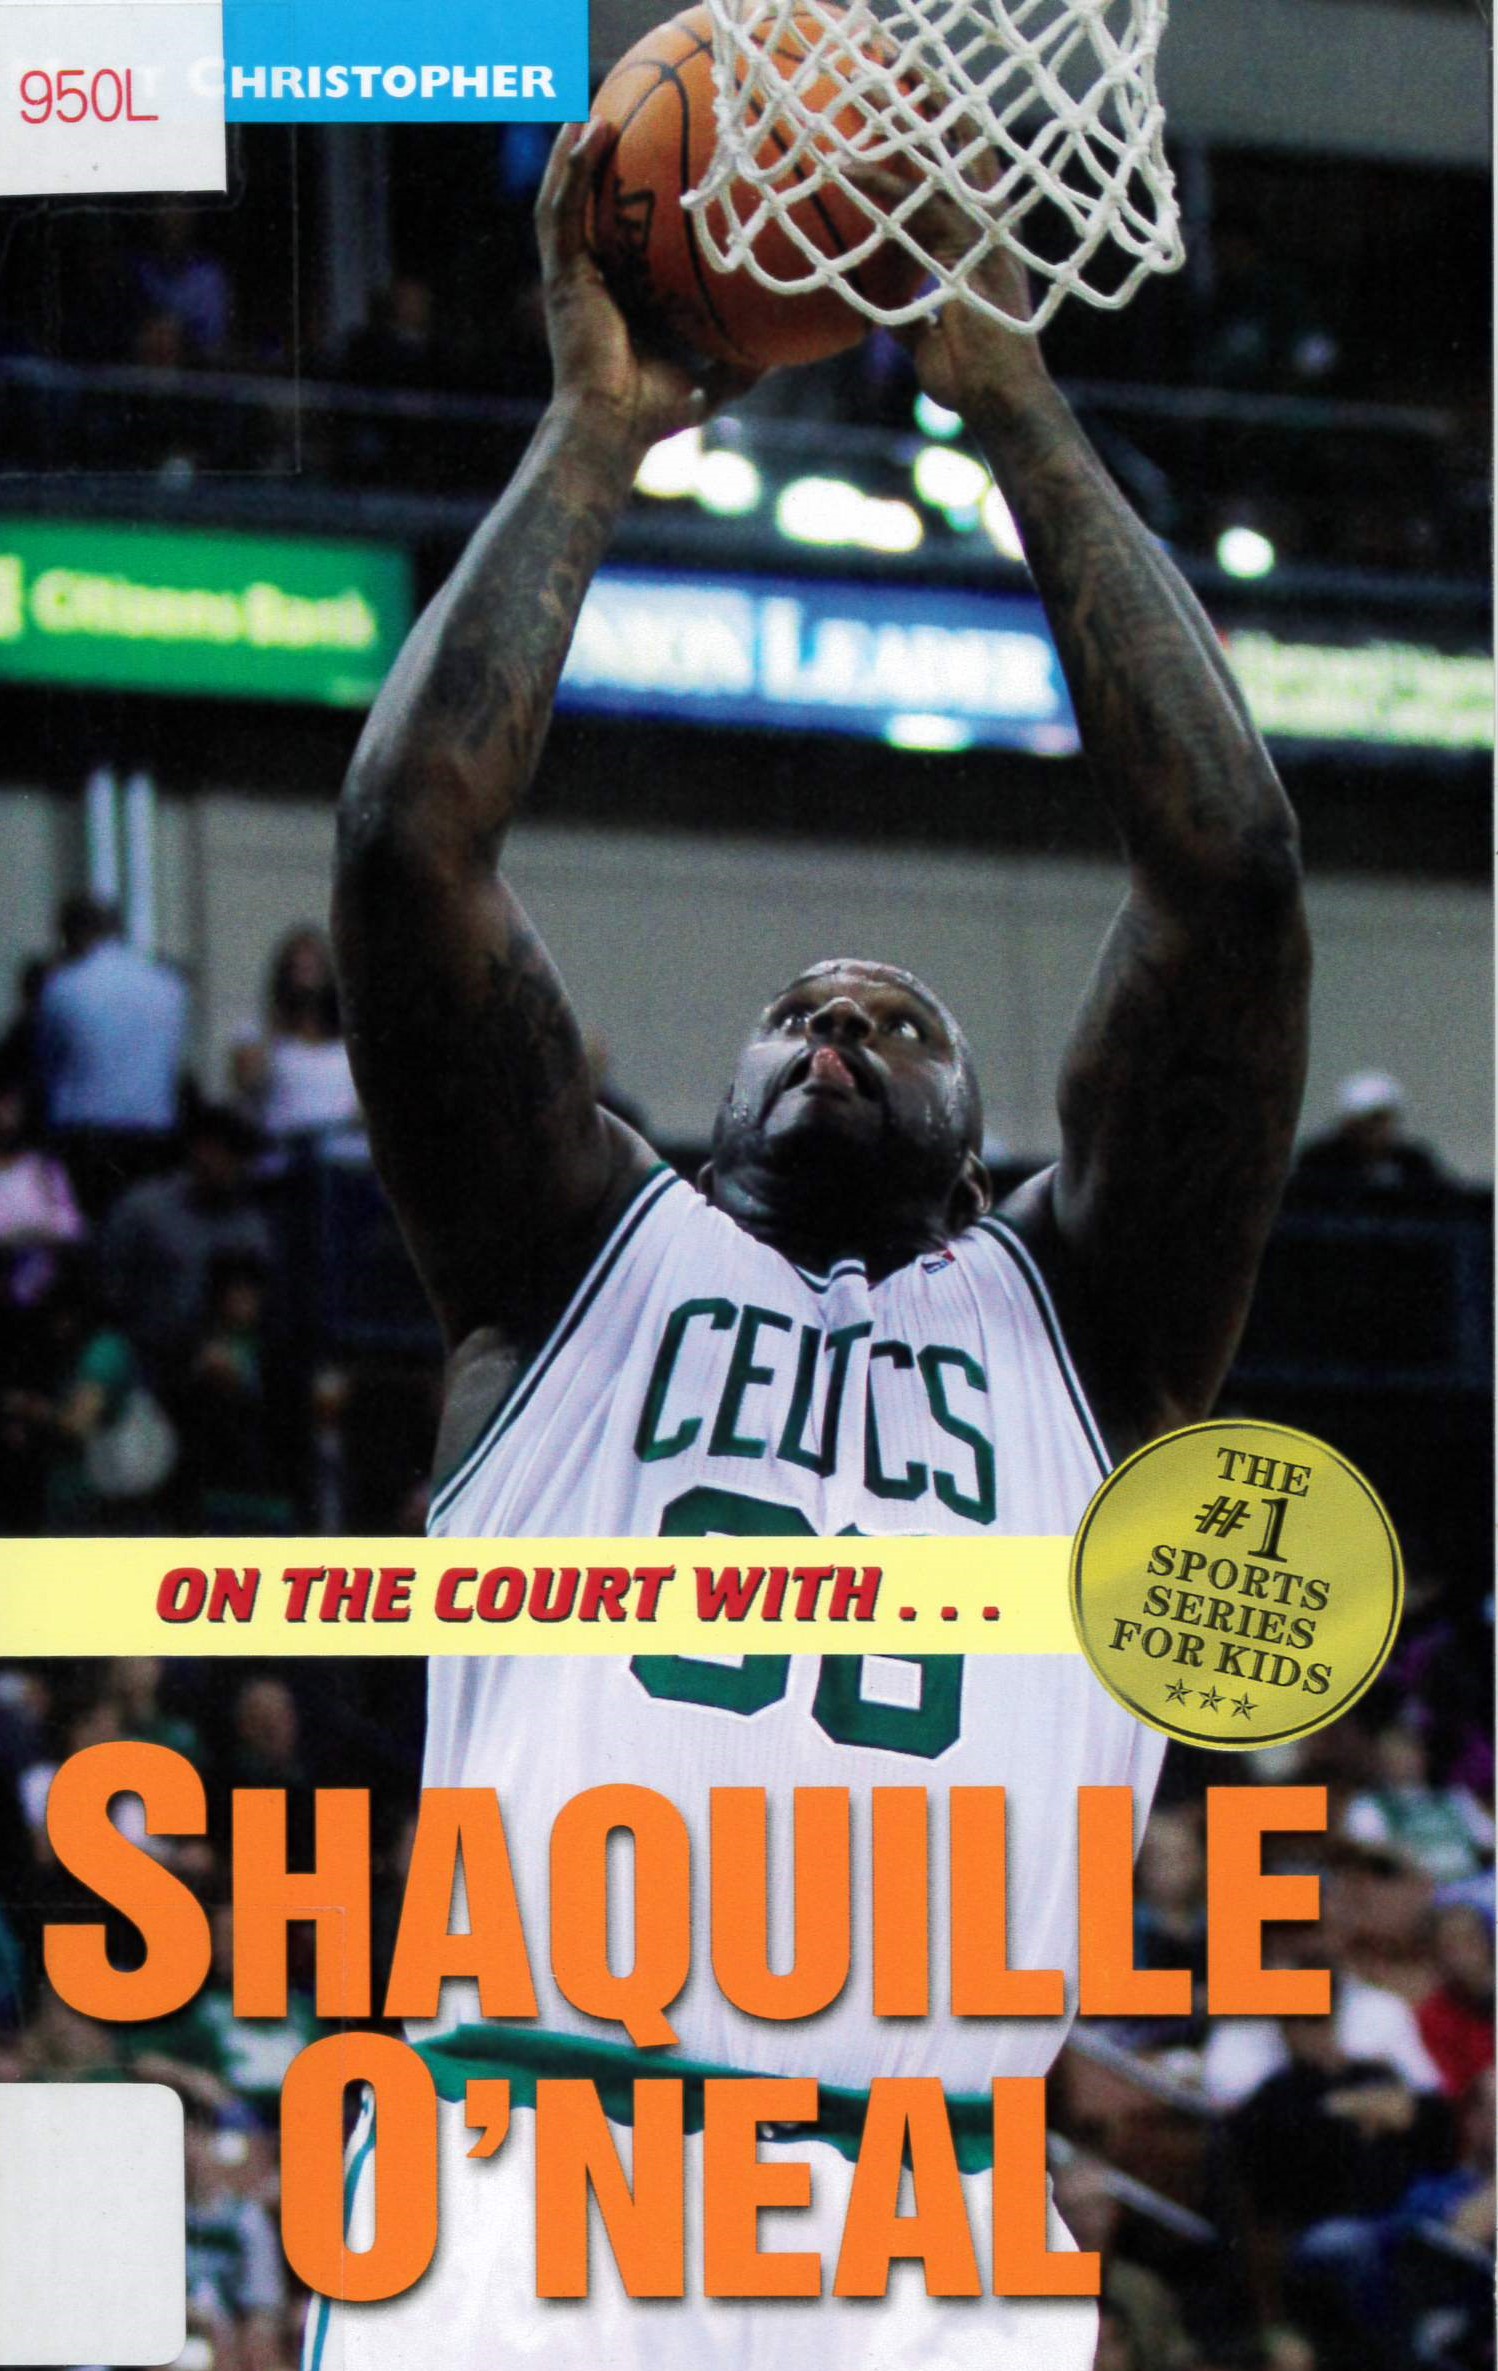 On the court with-- Shaquille O